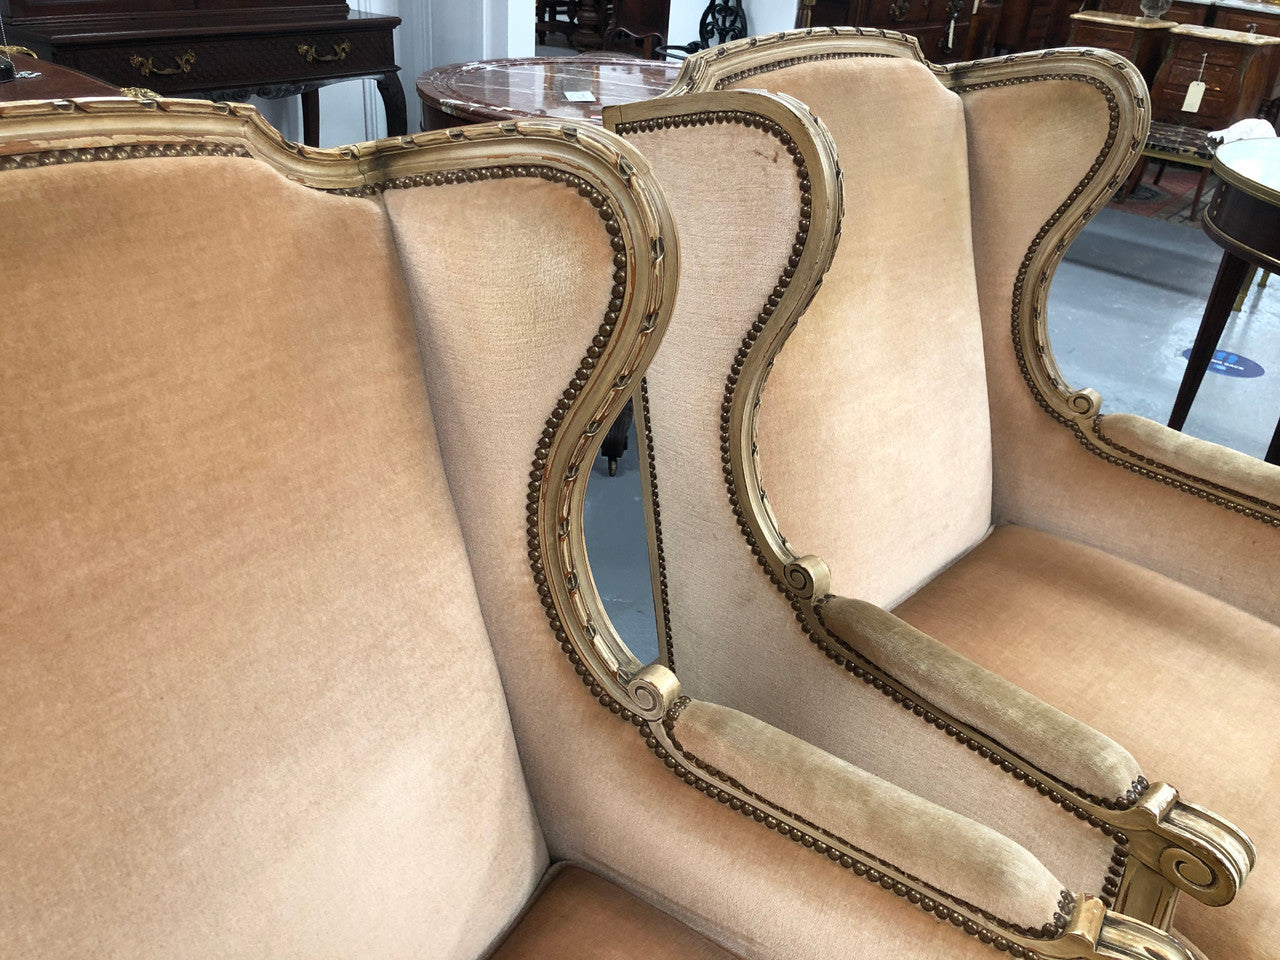 Pair of Vintage French original painted bergere wingback armchairs. The fabric is in very good original condition, please view photos as they help form part of the description. Please note the matching foot stool is being sold separately.